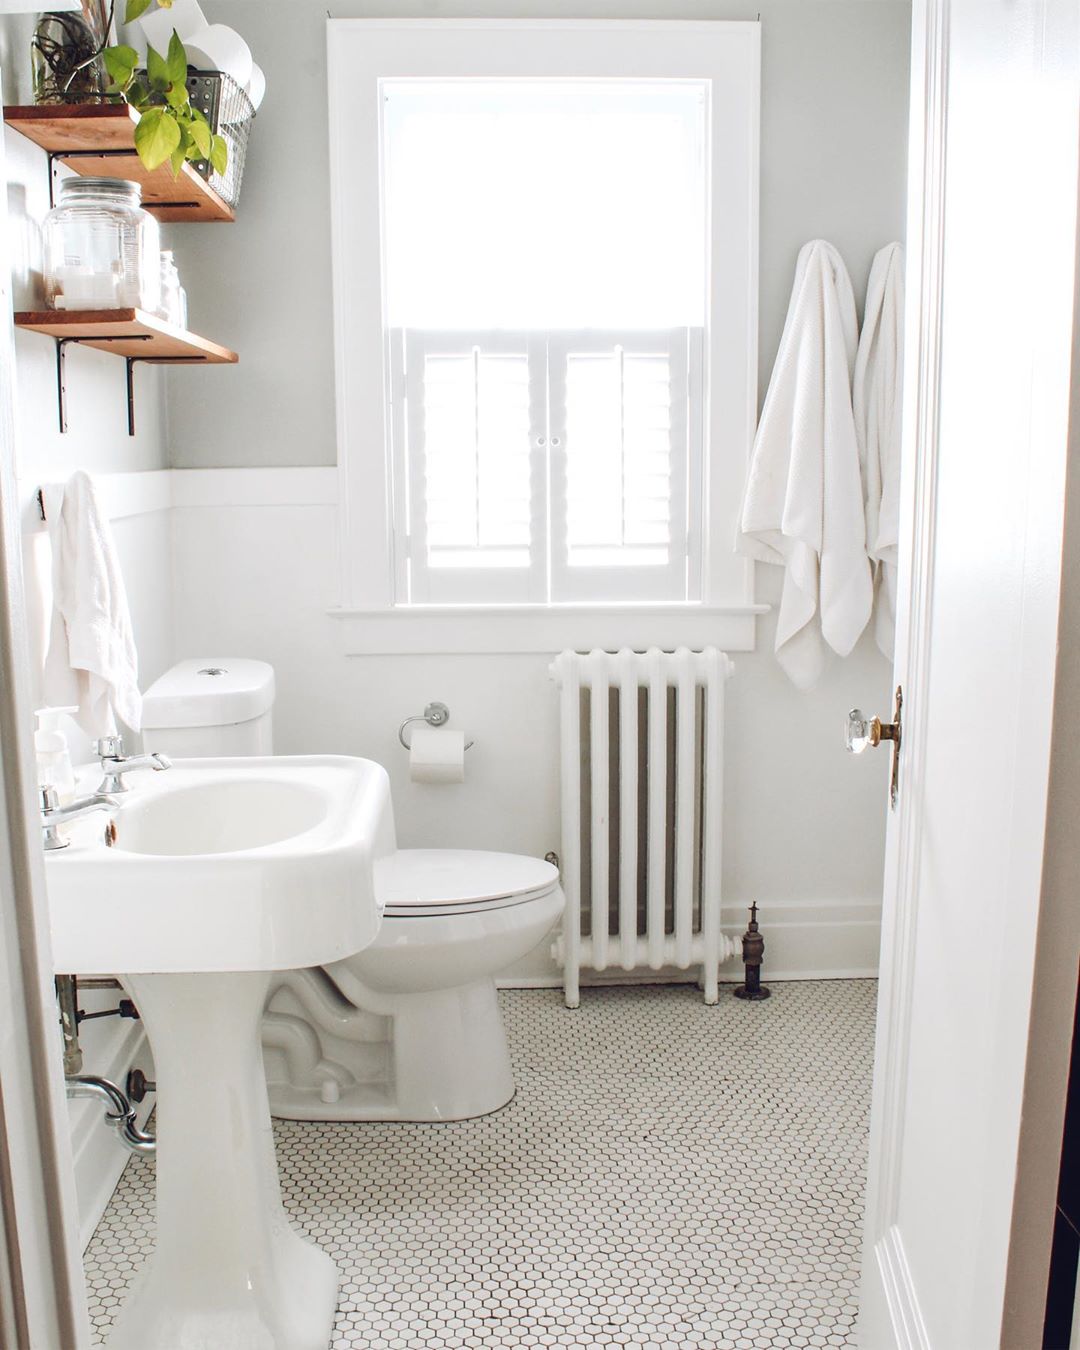 Small, all-white bathroom with wood shelves. Photo by Instagram user @thelittlebylittlehome_